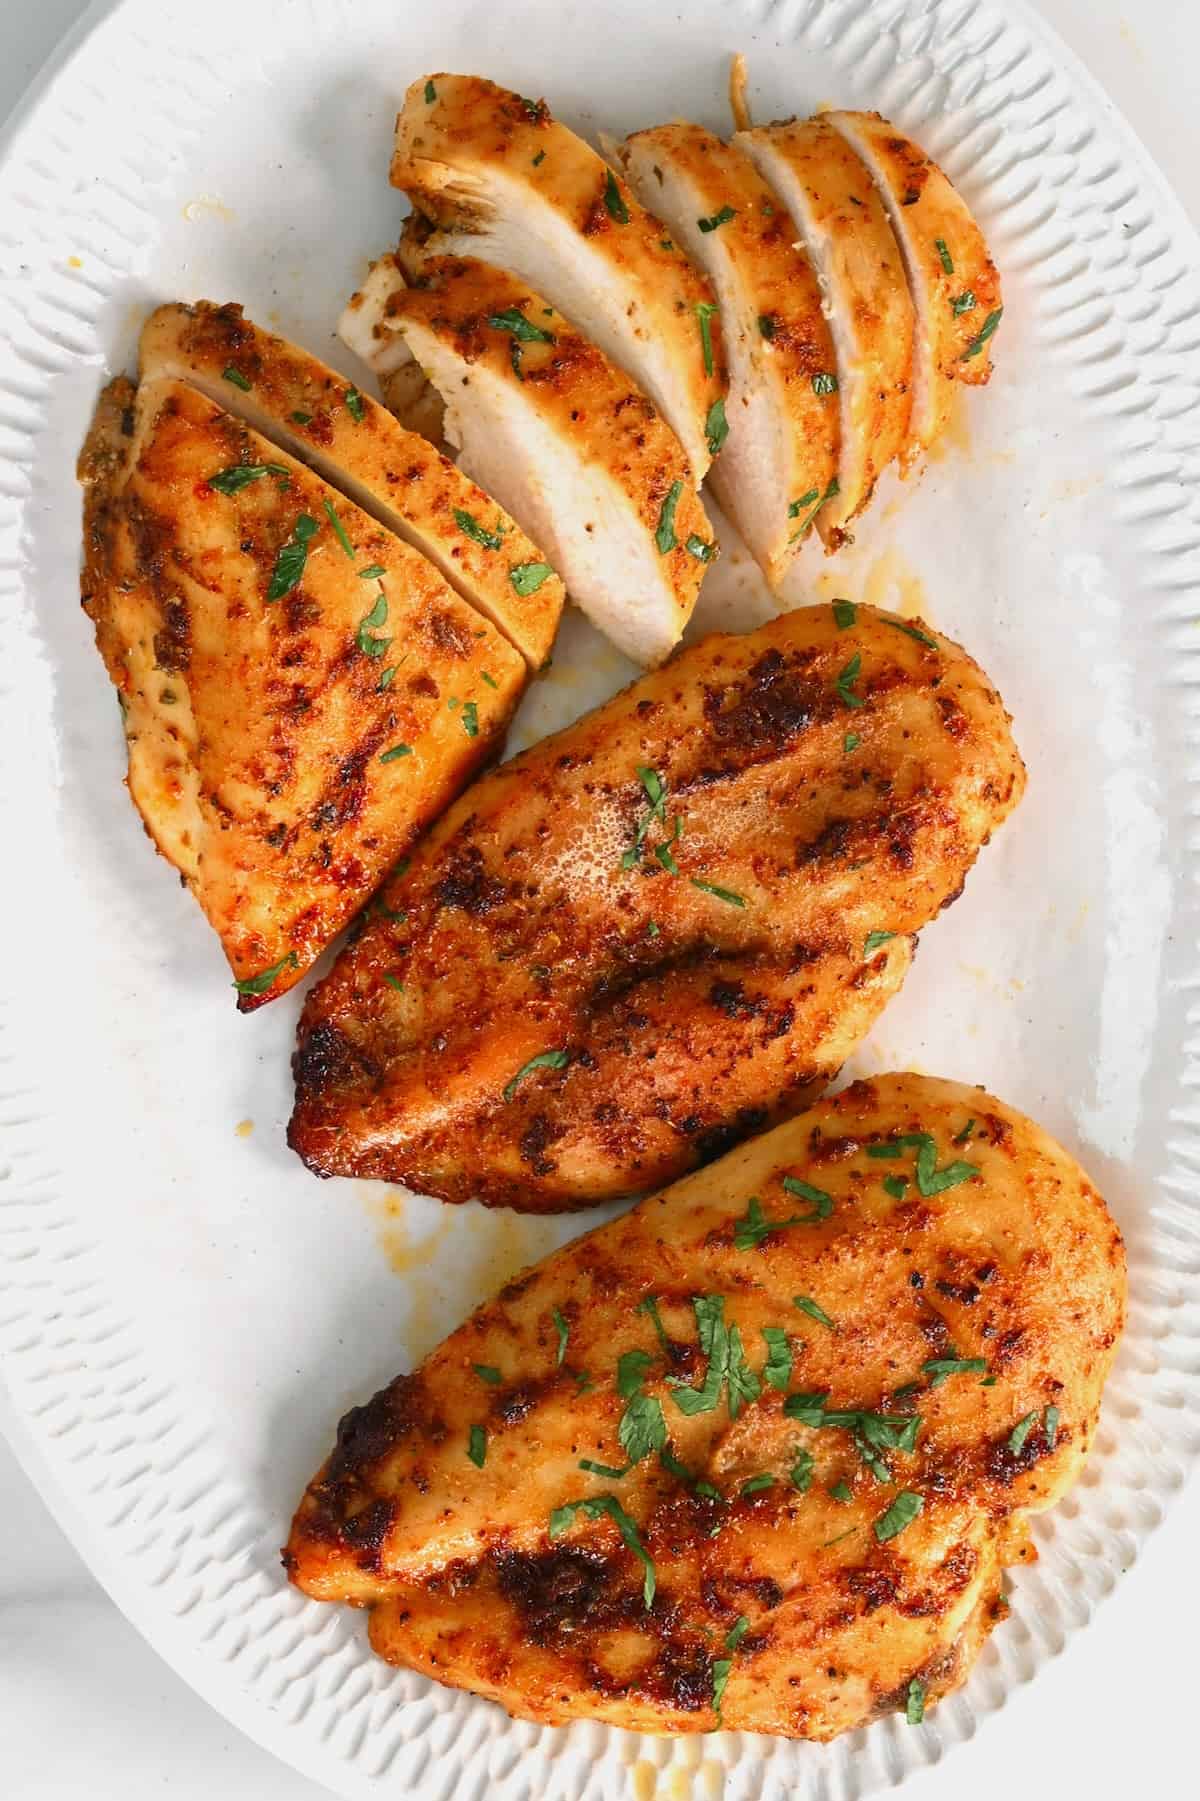 Sliced baked chicken breast topped with parsley